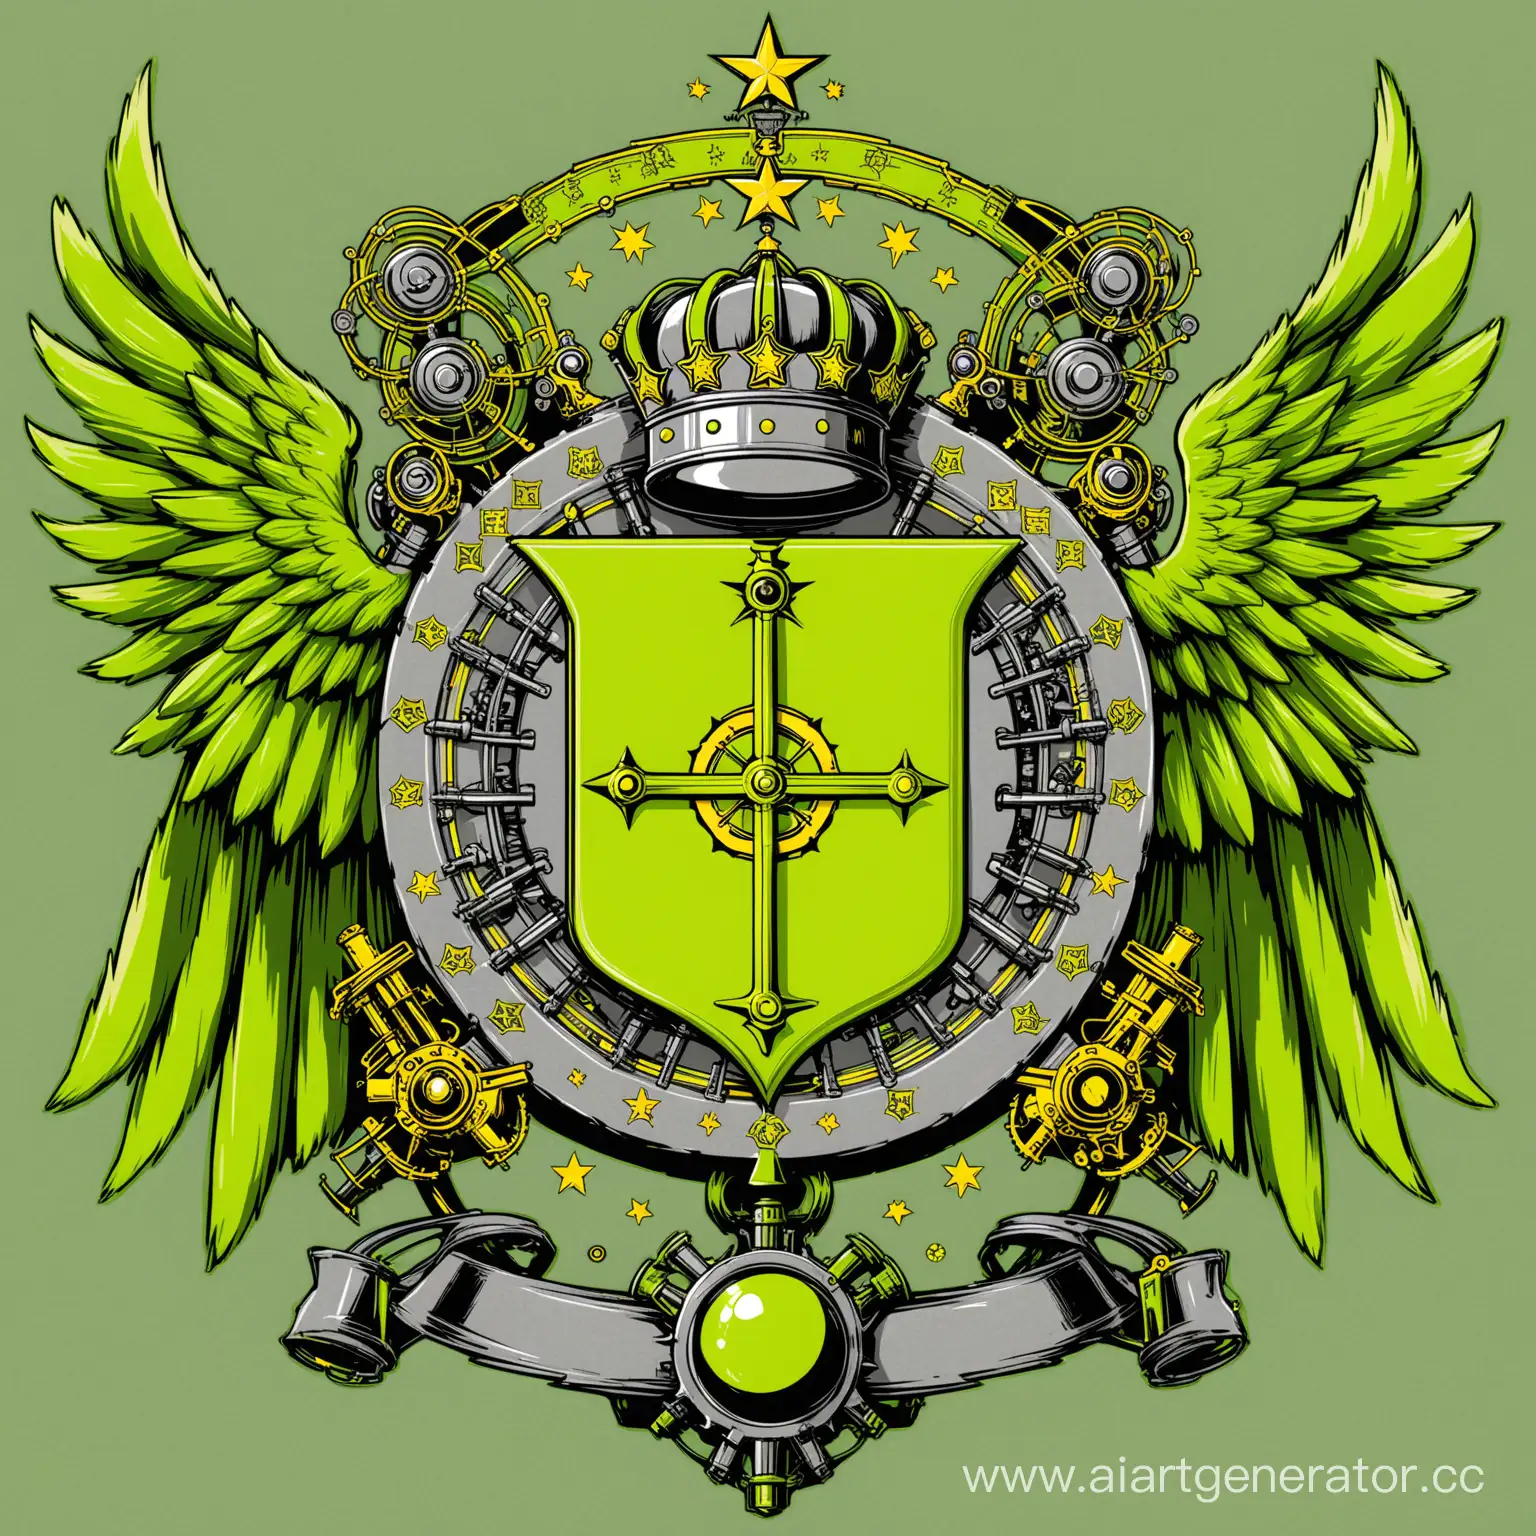 Coat-of-Arms-of-the-Empire-of-Epsilon-Mechanisms-and-Chemistry-in-Acid-Green-and-Mechanical-Gray